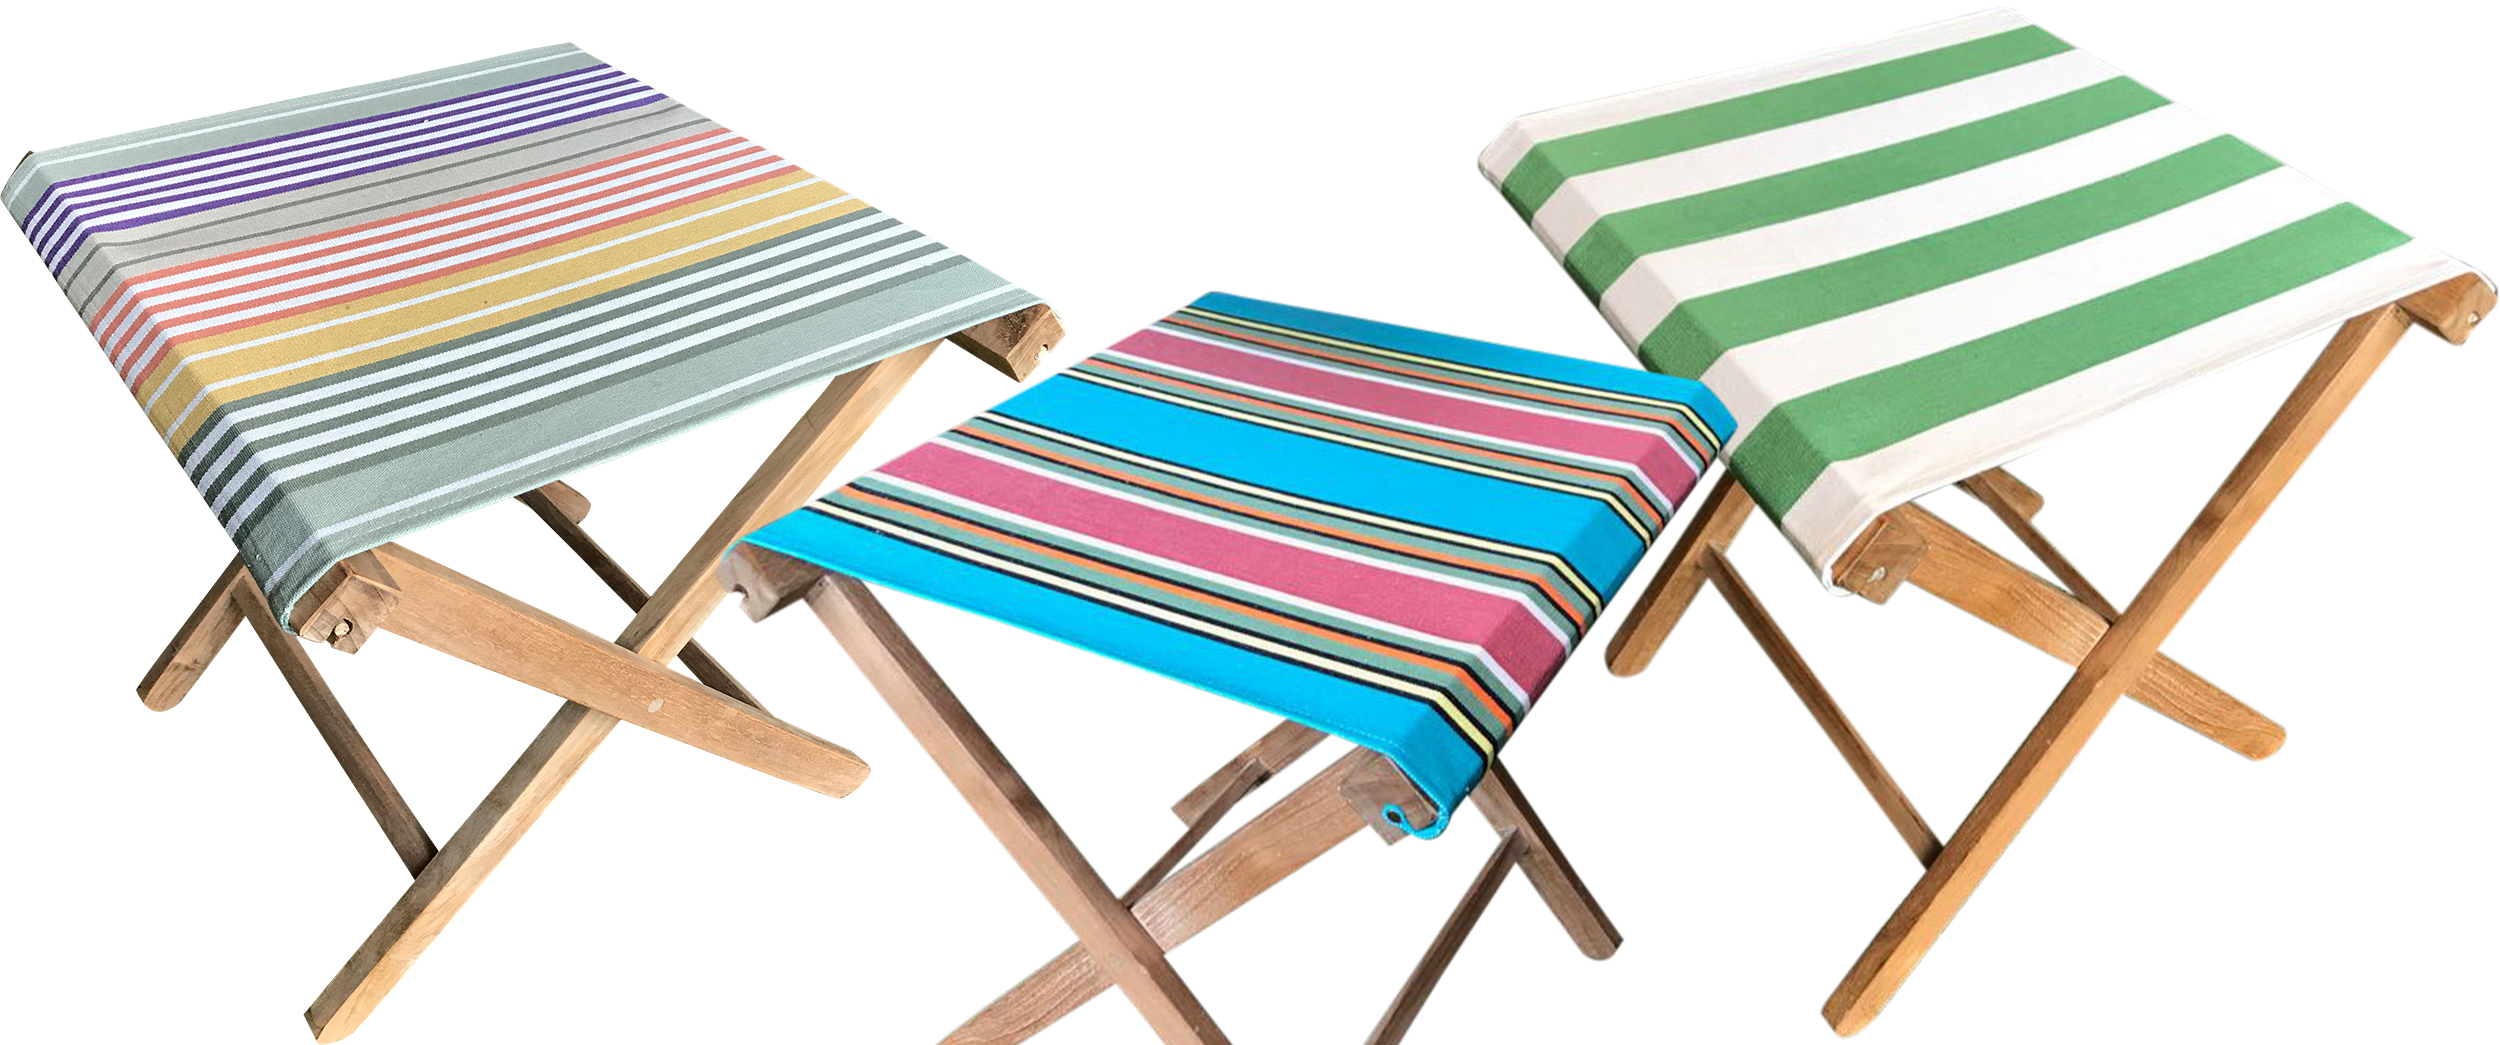 Portable Folding Stools with Striped Seats